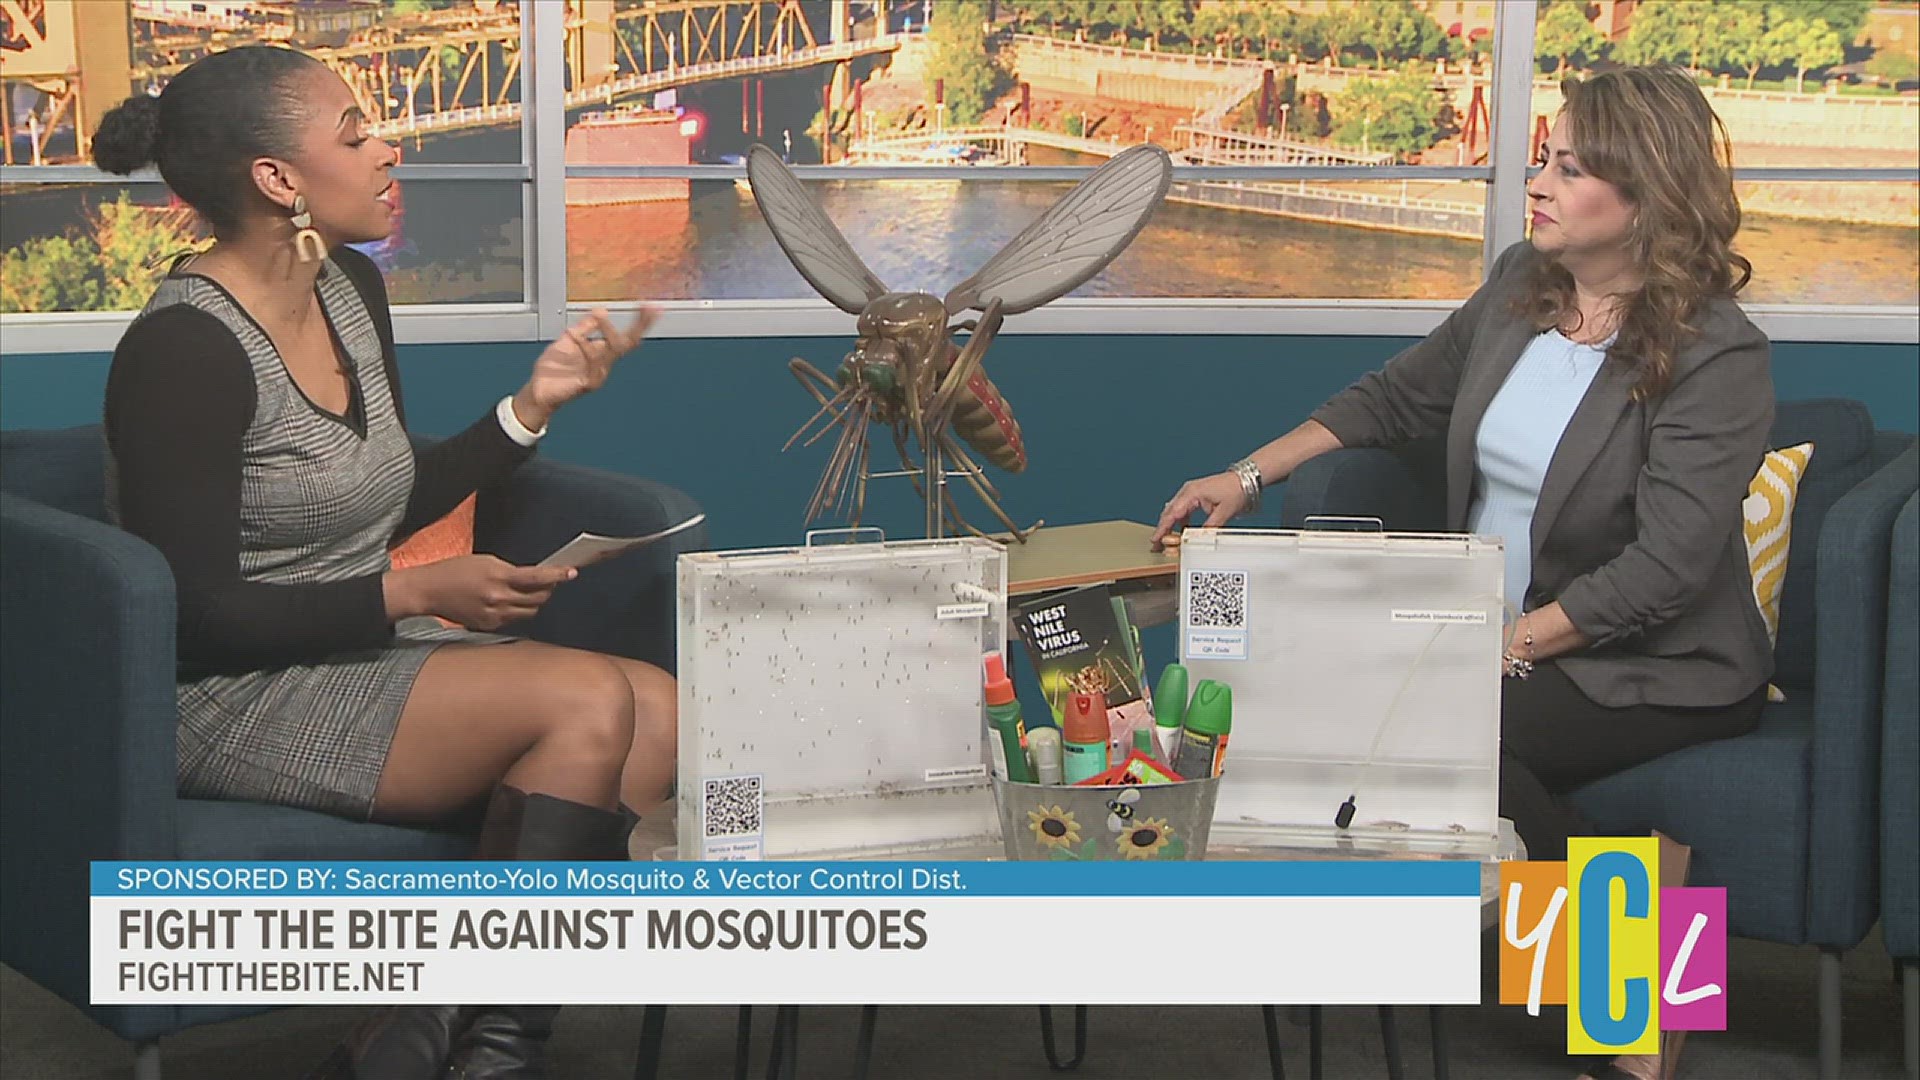 With springtime comes mosquitoes! Here's how you can protect yourself and your home. Sponsored by Sacramento-Yolo Mosquito & Vector Control District.